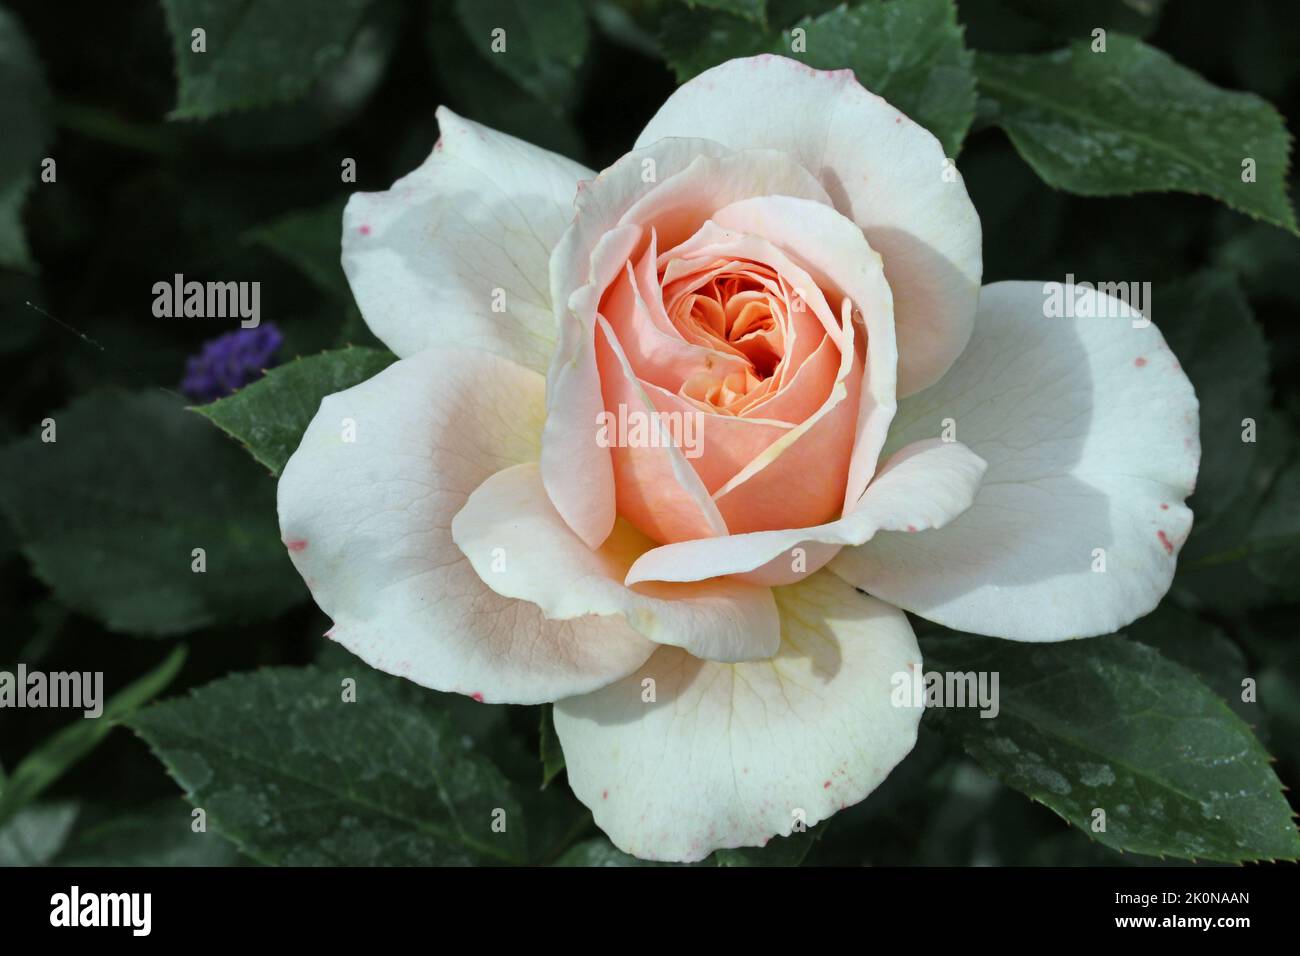 Pink rose flower, Rosa species of unknown variety, in close up with a background of blurred leaves. Stock Photo